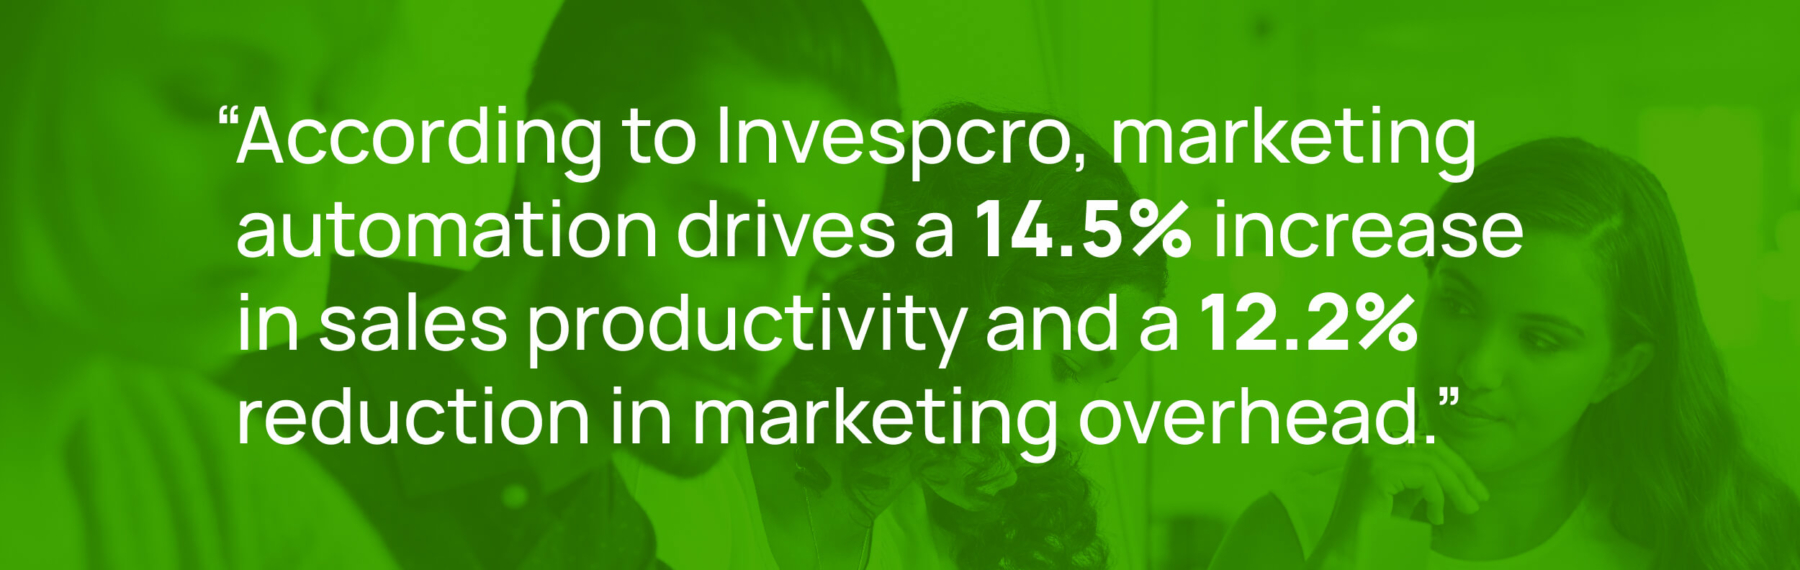 according to invespcro, marketing automation drives a 14.5% increase in sales productivity and a 12.2% reduction in marketing overhead.